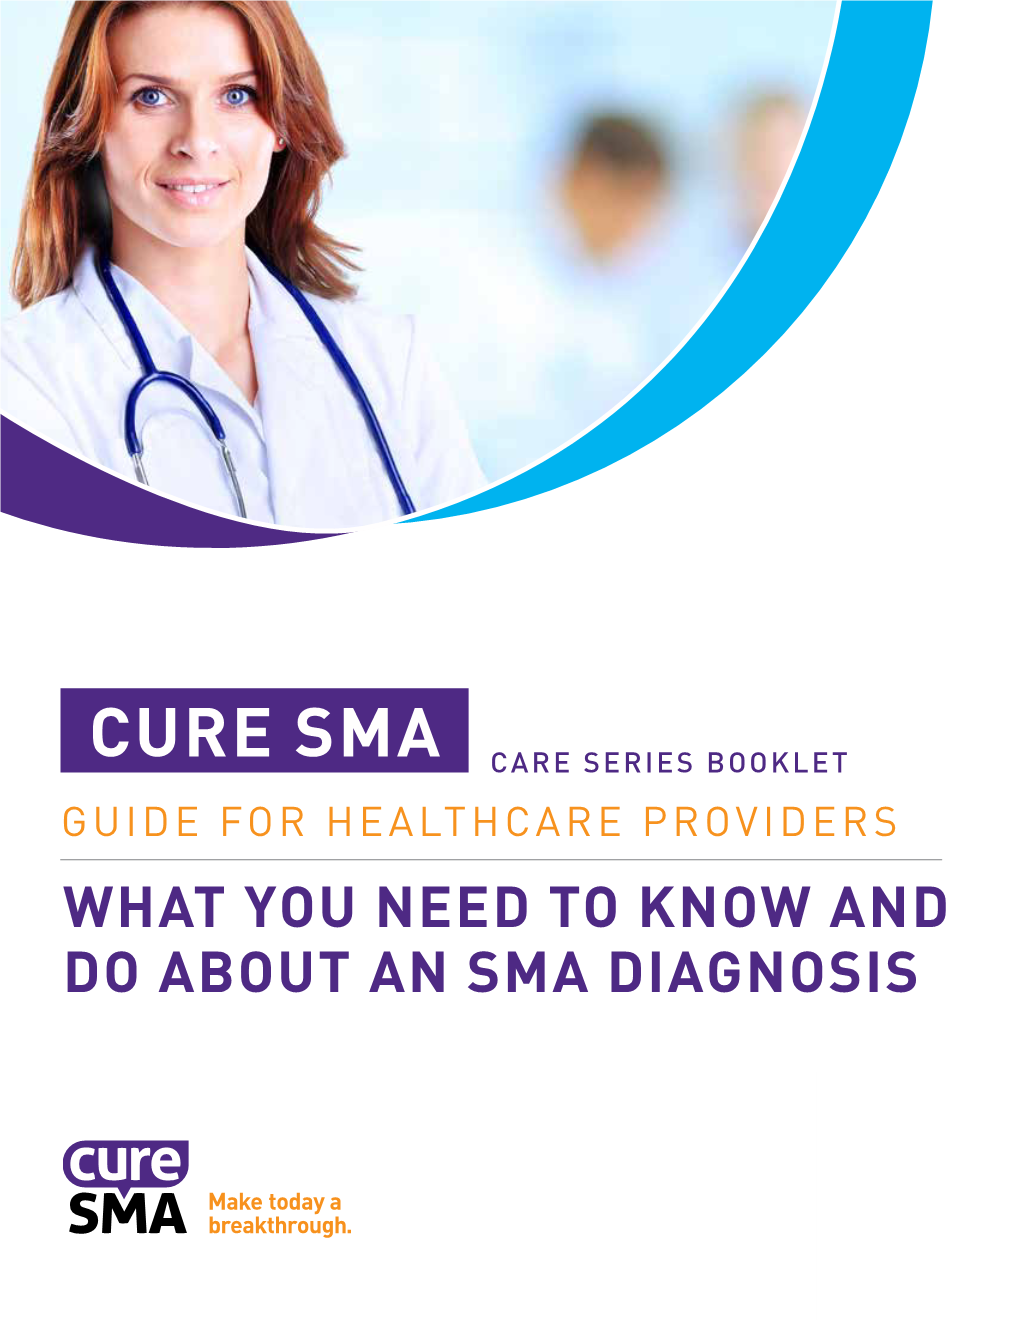 Cure Sma Care Series Booklet Guide for Healthcare Providers What You Need to Know and Do About an Sma Diagnosis